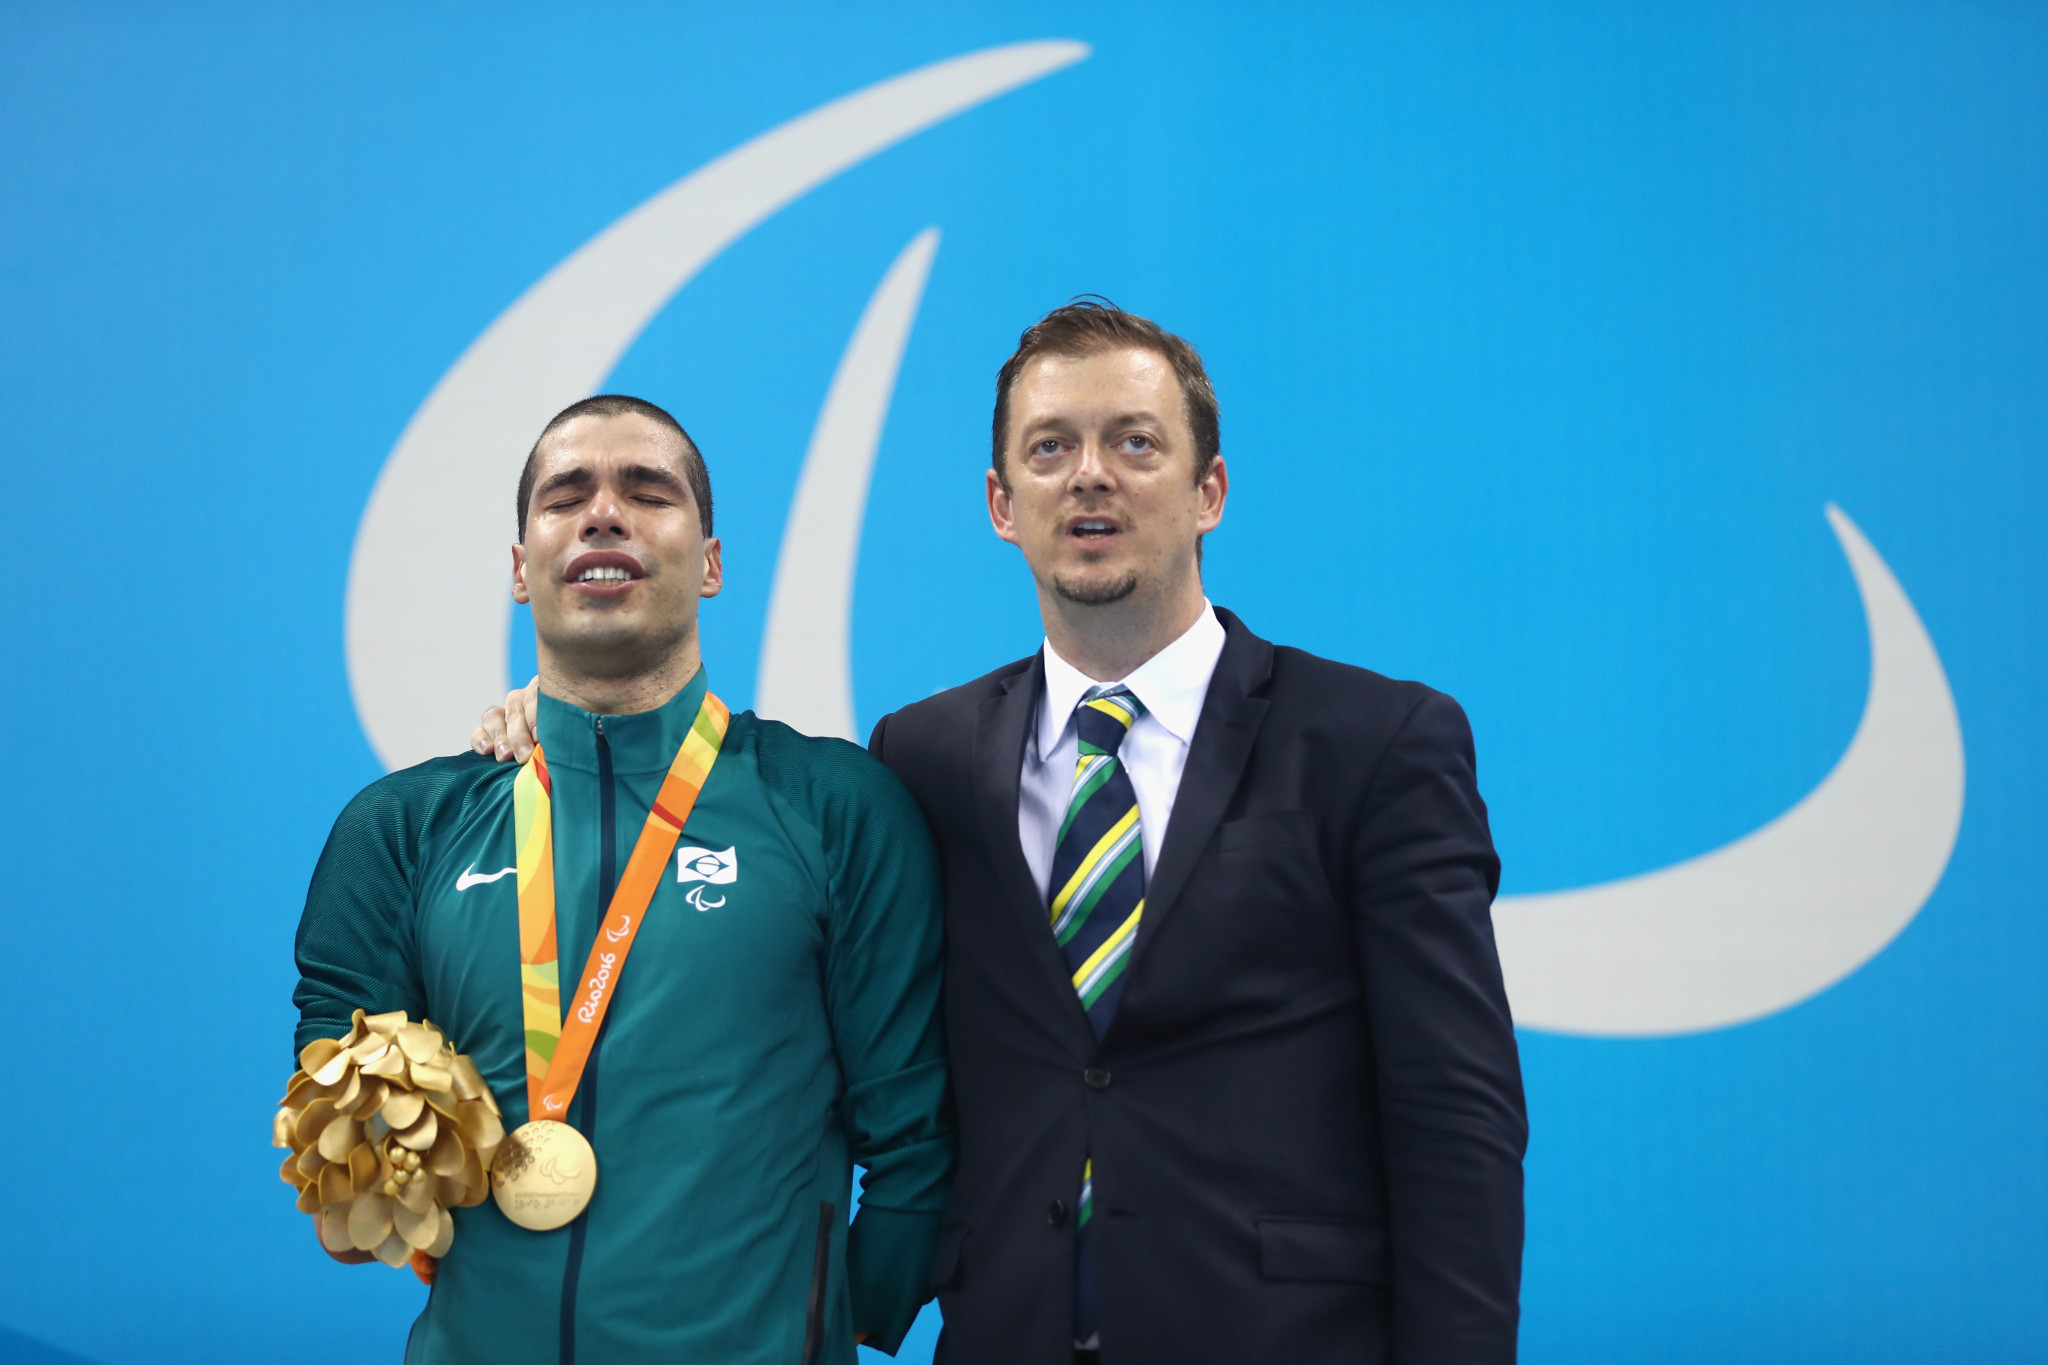 Brazil's Andrew Parsons, pictured here with his country's swimming star Daniel Dias at Rio 2016, is promising a better dialogue with IPC members if he is elected President ©Getty Images